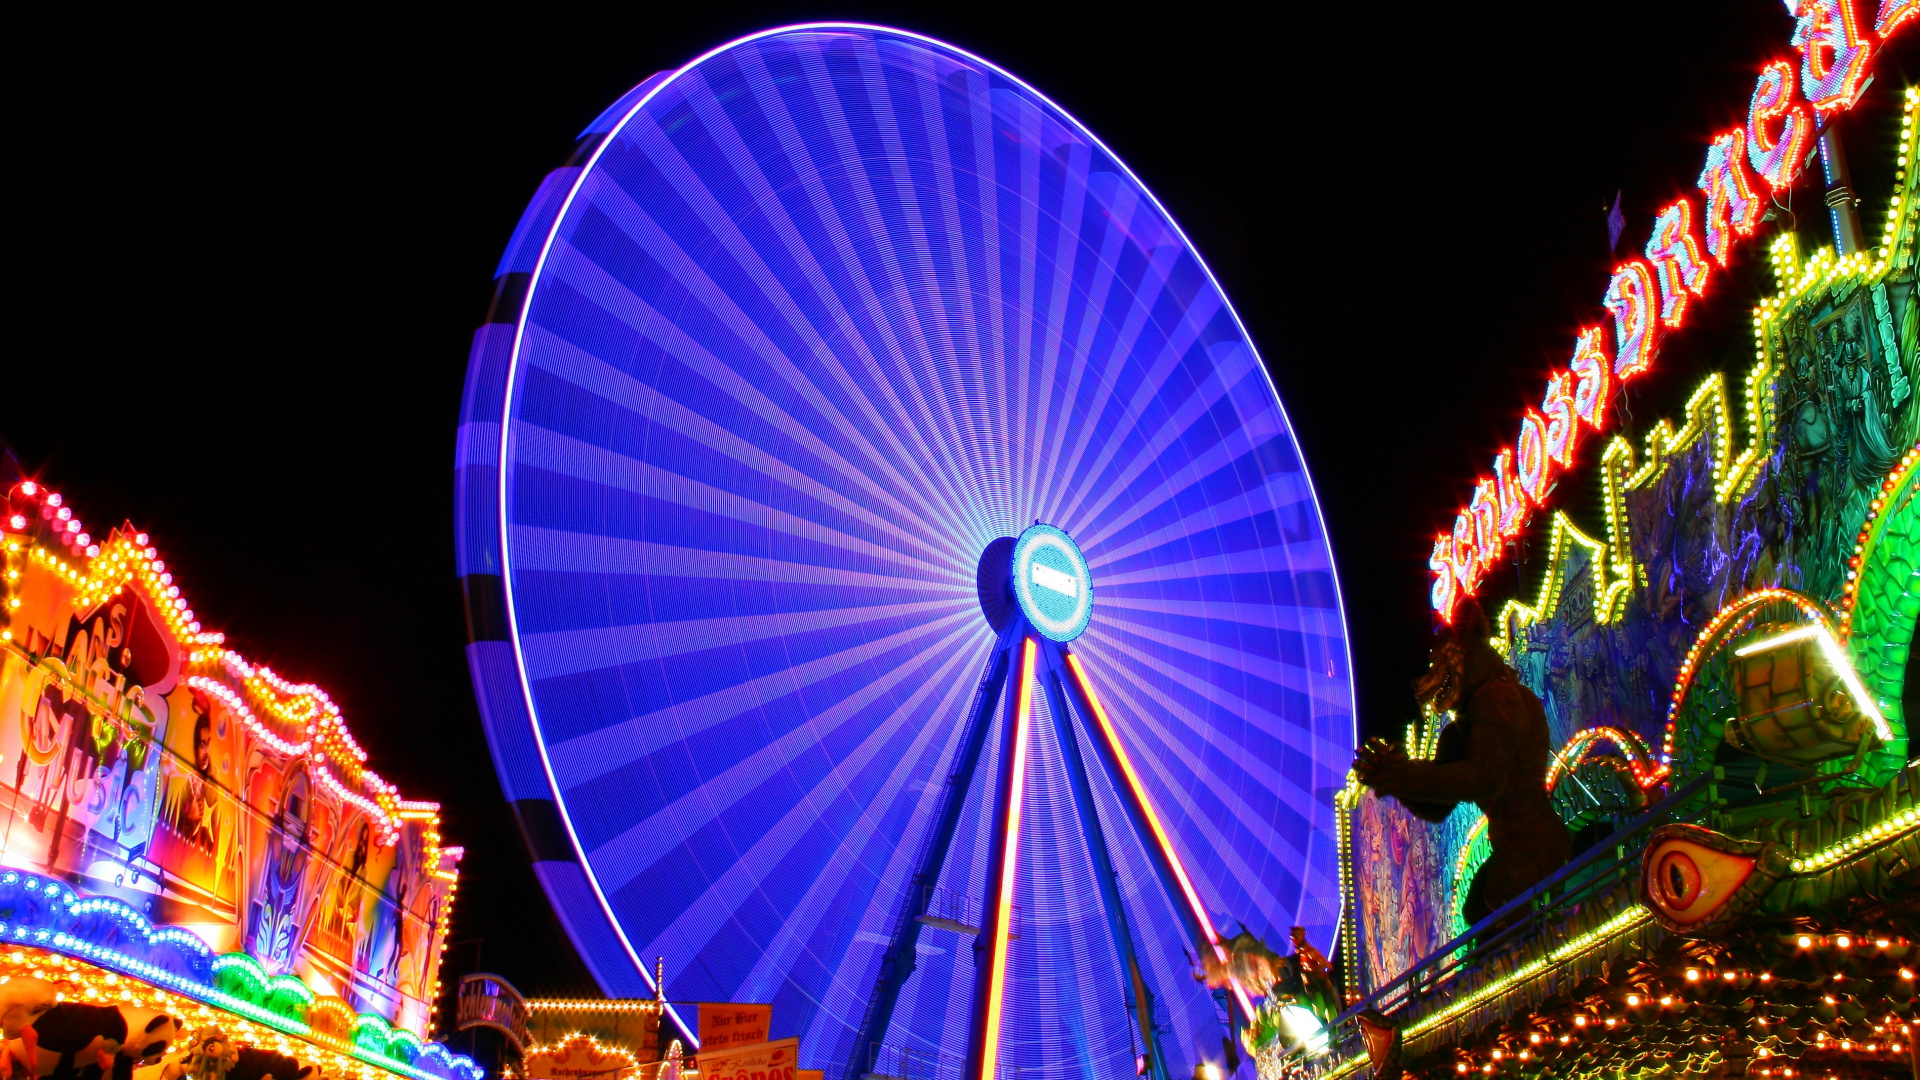 Blue and Red Ferris Wheel During Night Time. Wallpaper in 1920x1080 Resolution